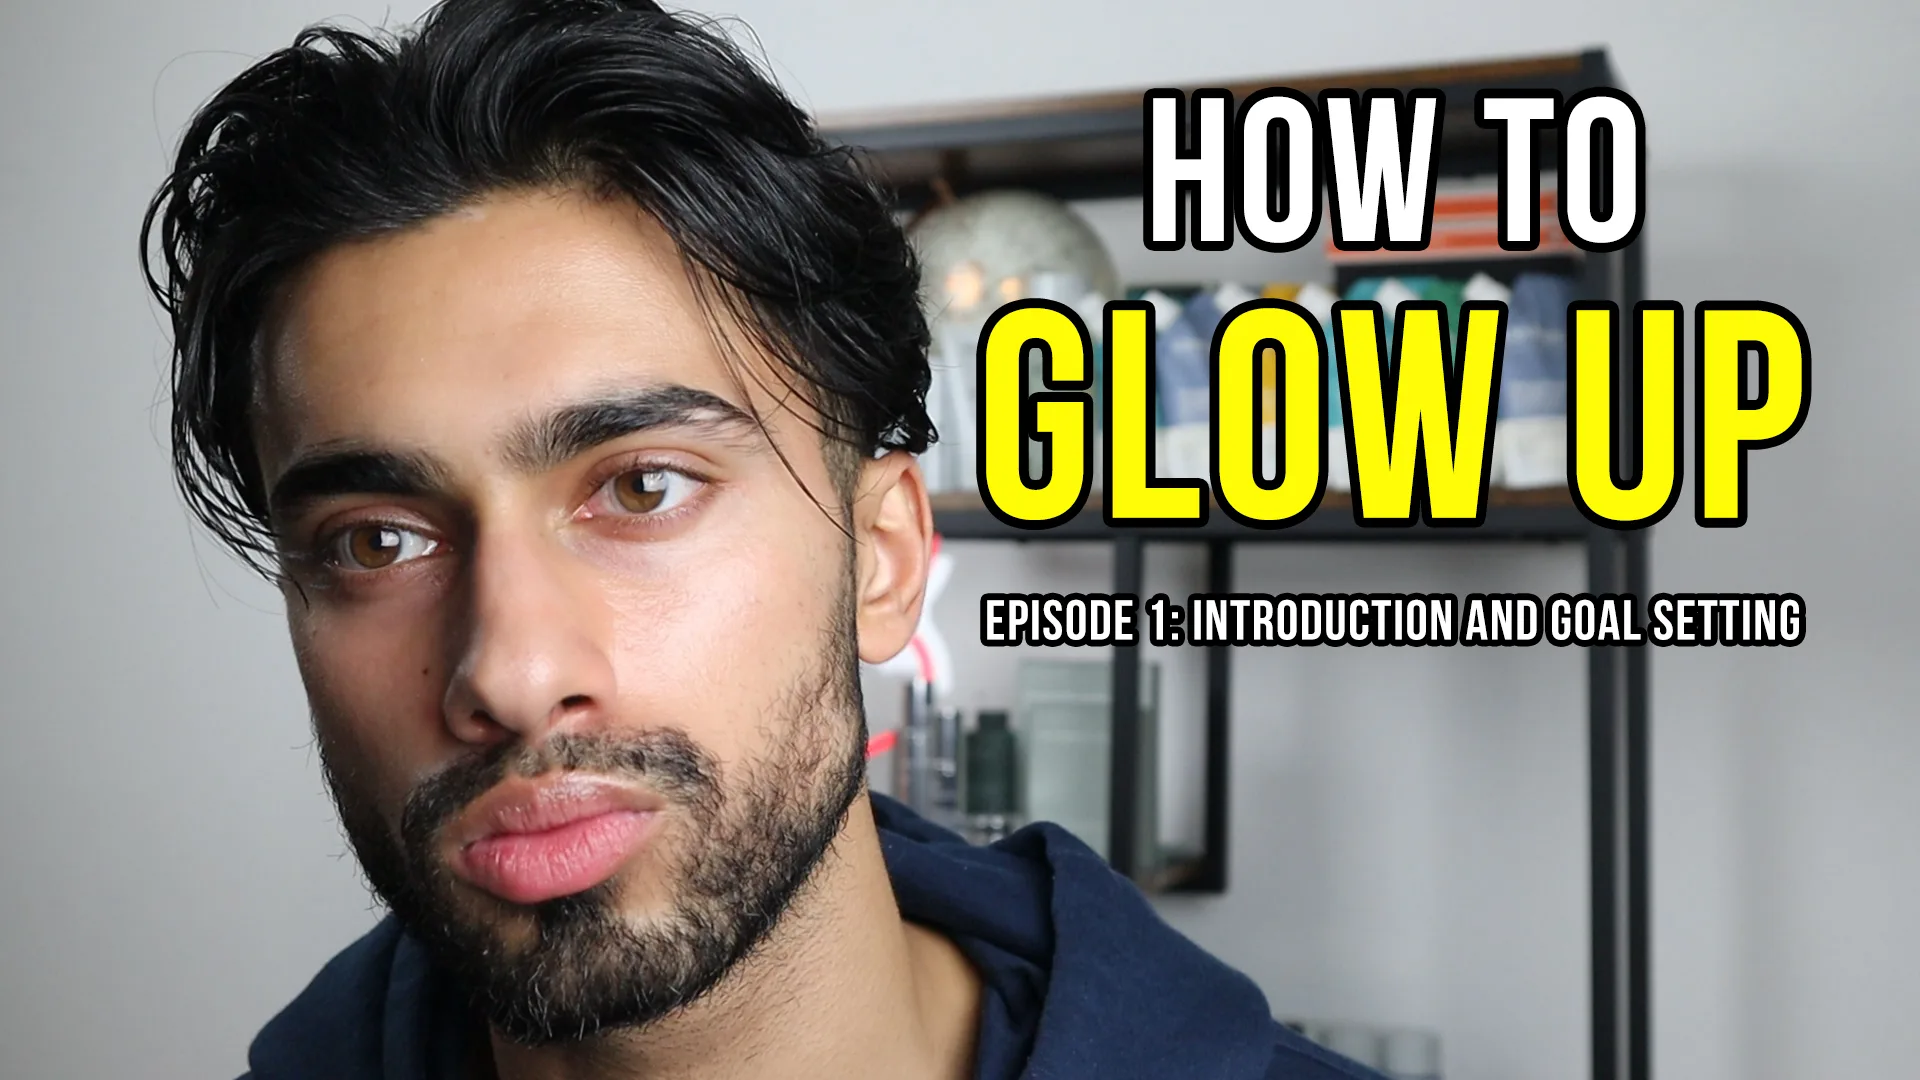 How To Glow Up Episode 1: Introduction and Goal Setting